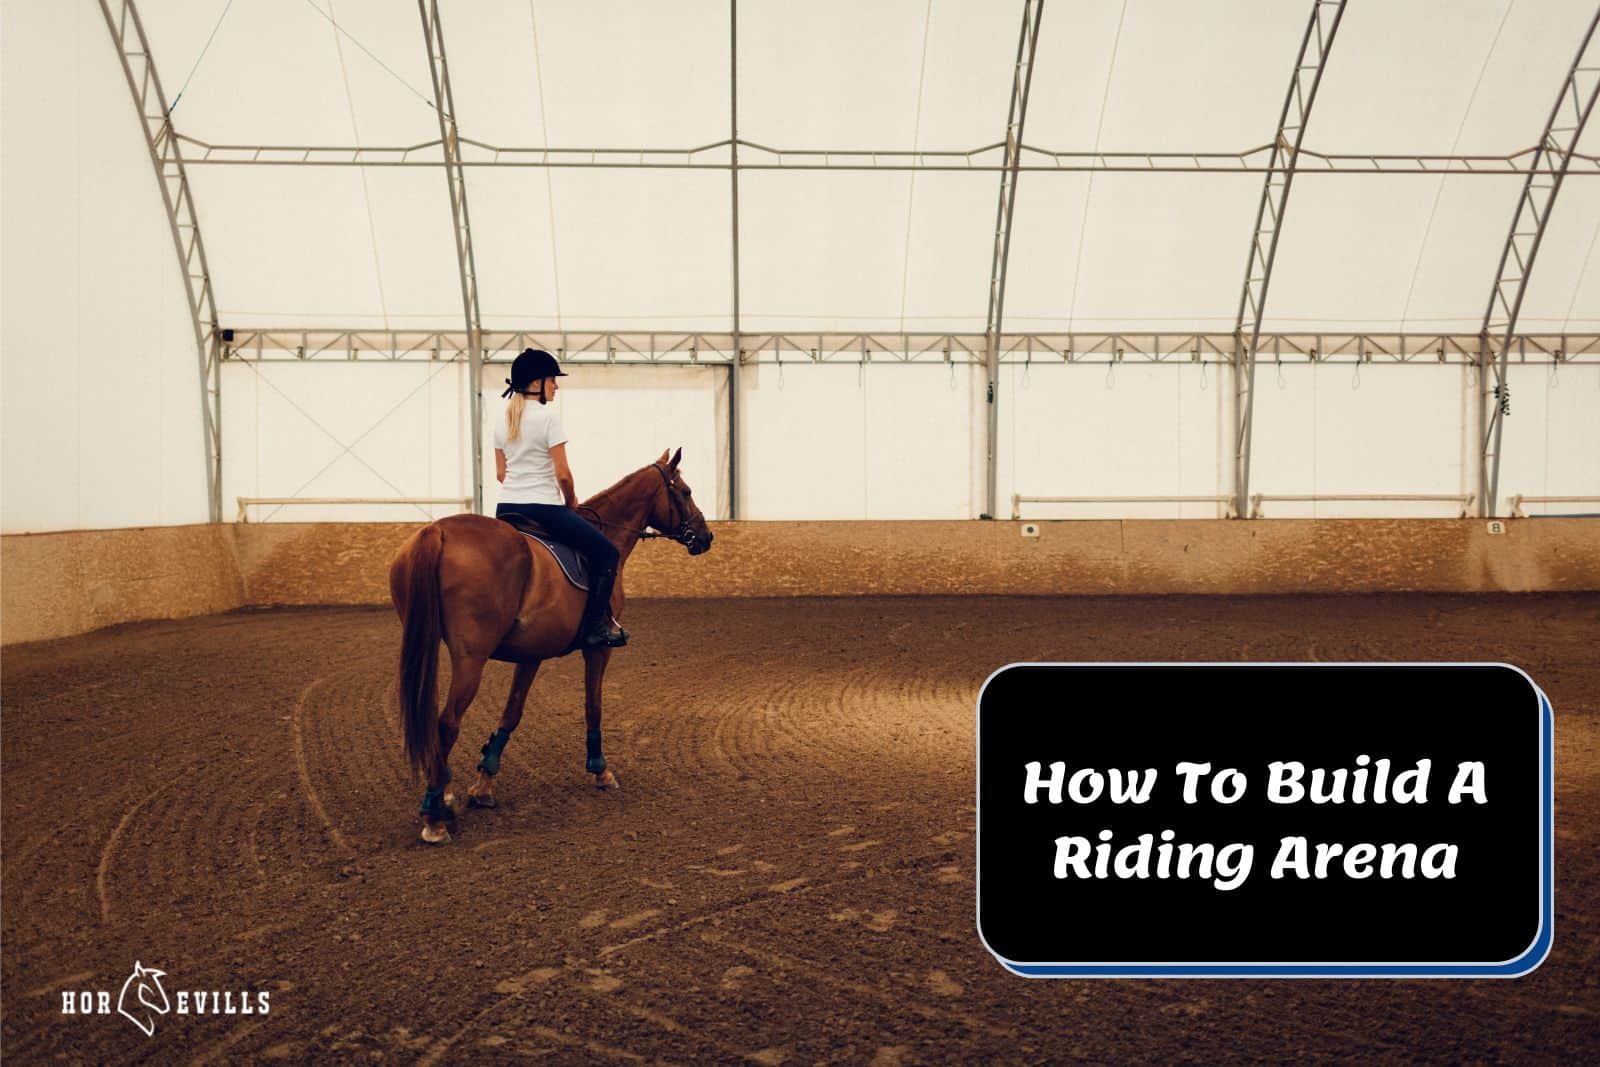 lady riding a horse in the indoor arena but how to build a riding arena?